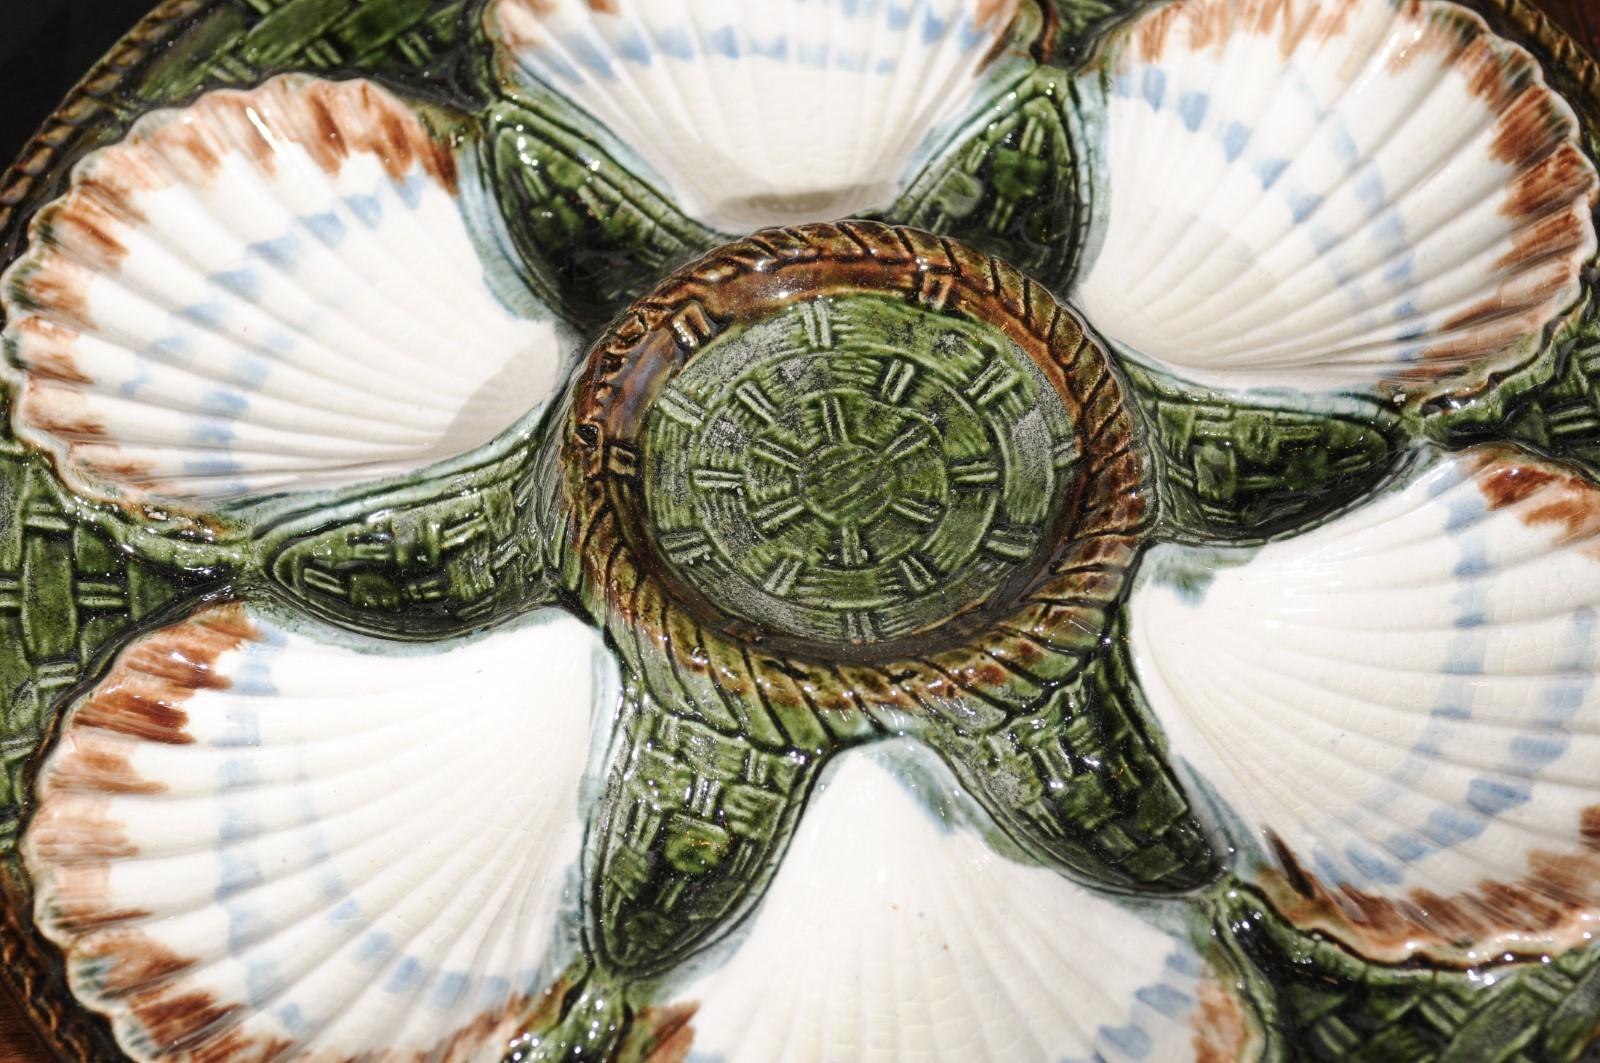 French Majolica Longchamp Terre de Fer Green Scallop Plates, 5 Available 6